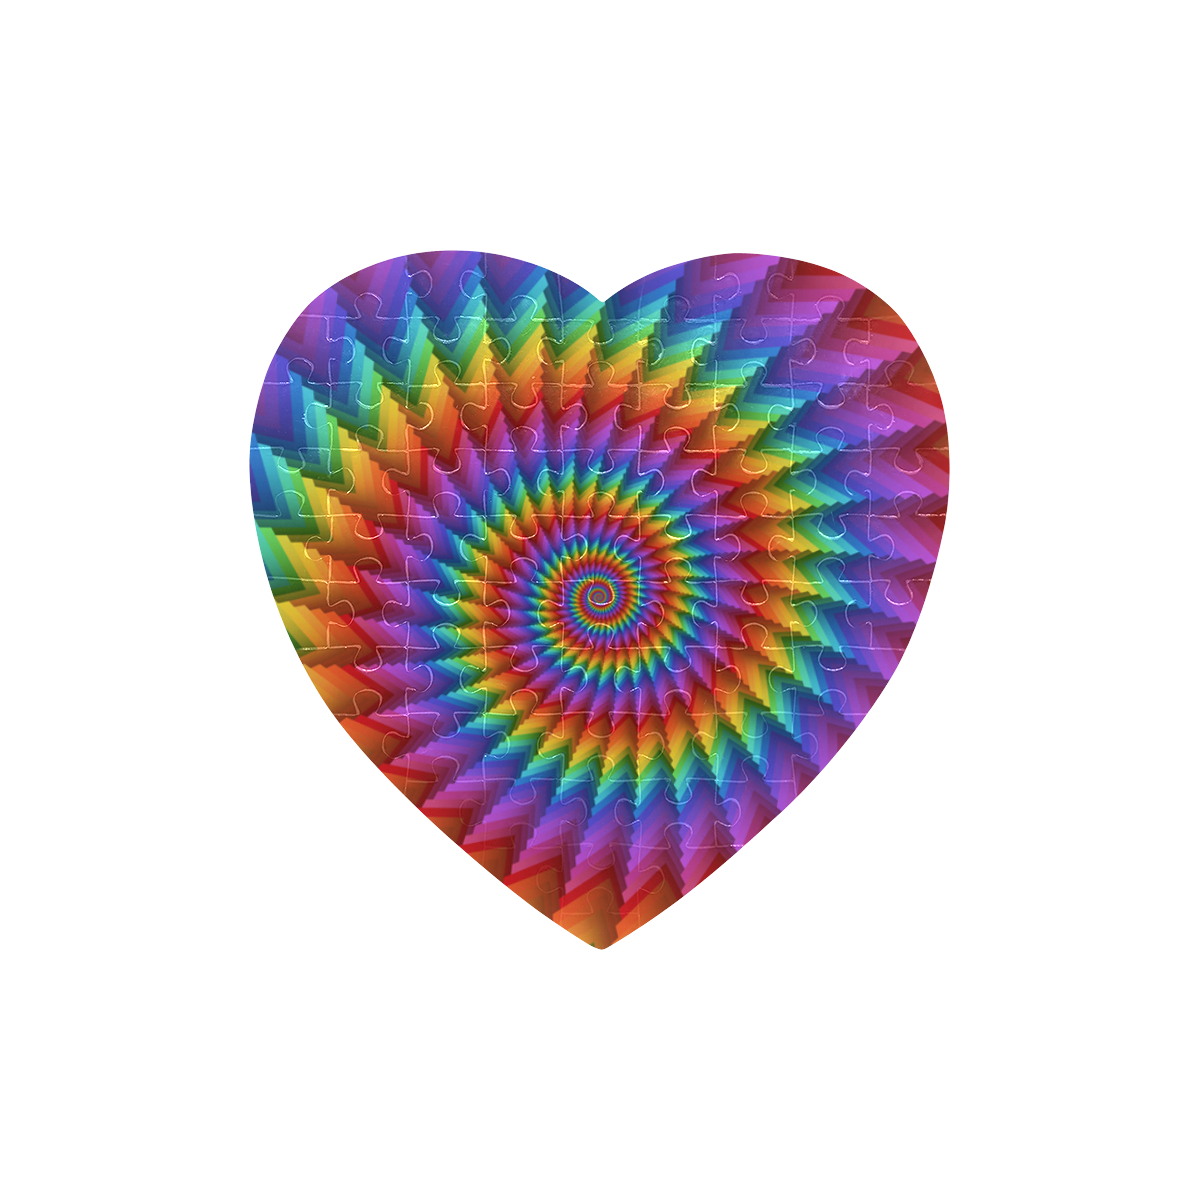 Psychedelic Rainbow Spiral Puzzle Heart-Shaped Jigsaw Puzzle (Set of 75 Pieces)